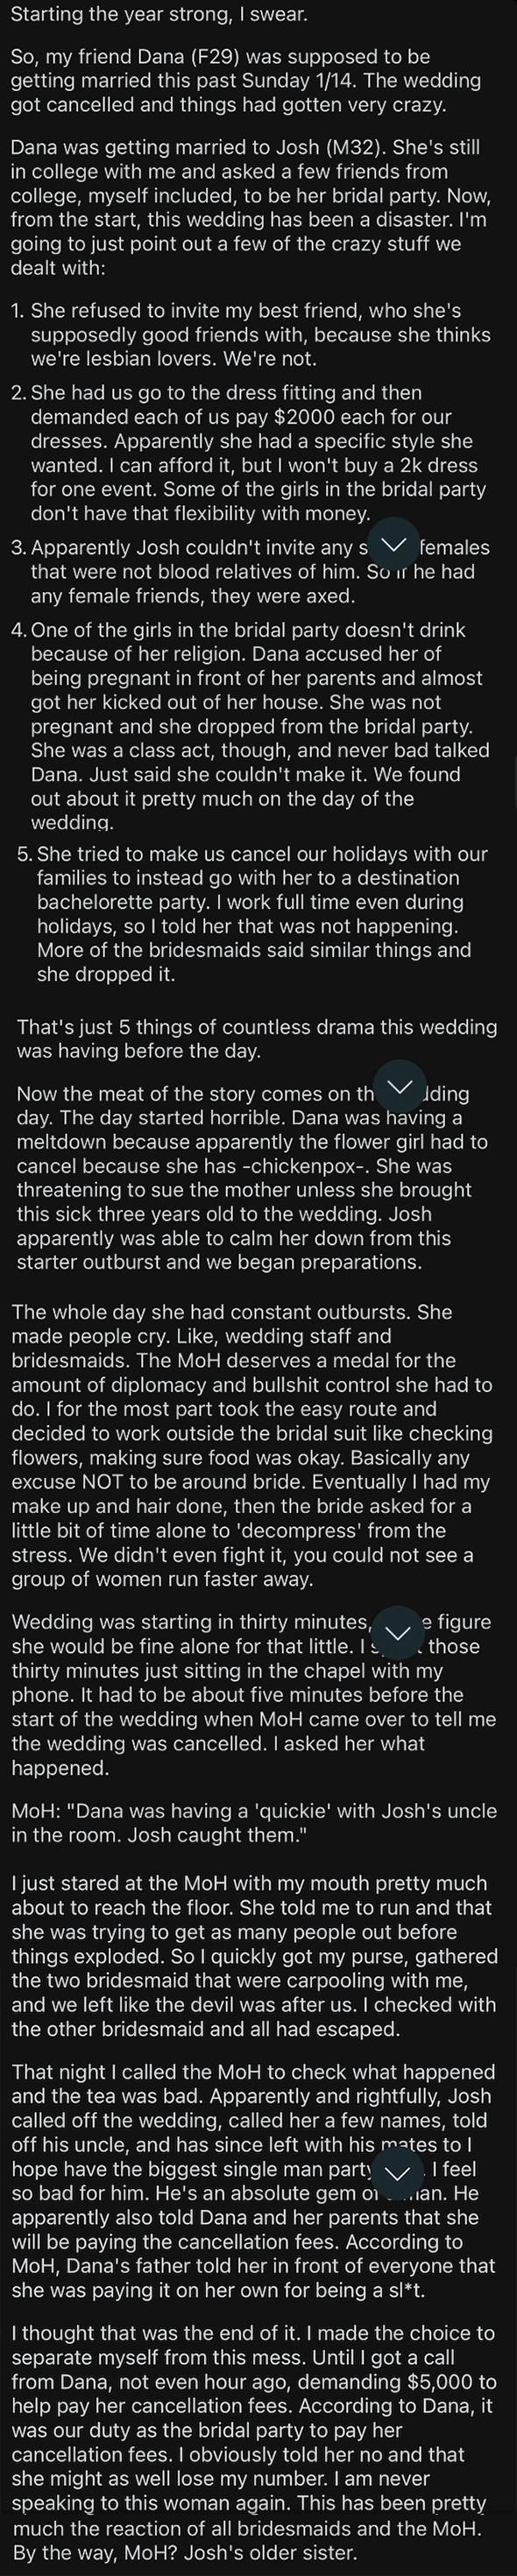 Image contains lengthy text recounting a dramatic story set at a wedding